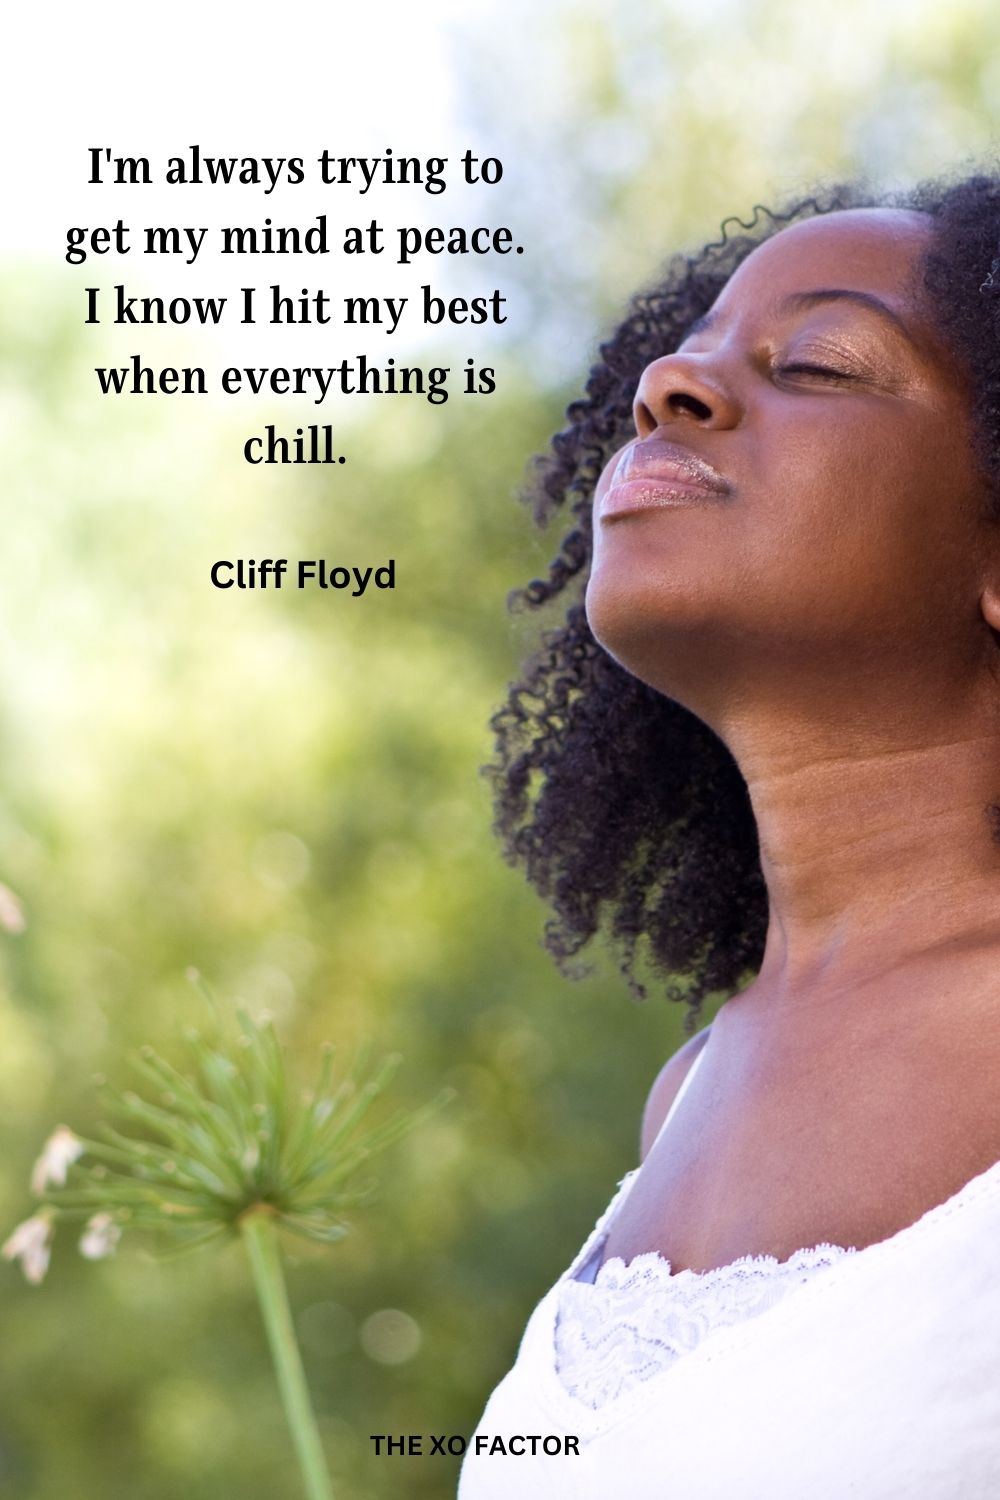 I'm always trying to get my mind at peace. I know I hit my best when everything is chill.
Cliff Floyd